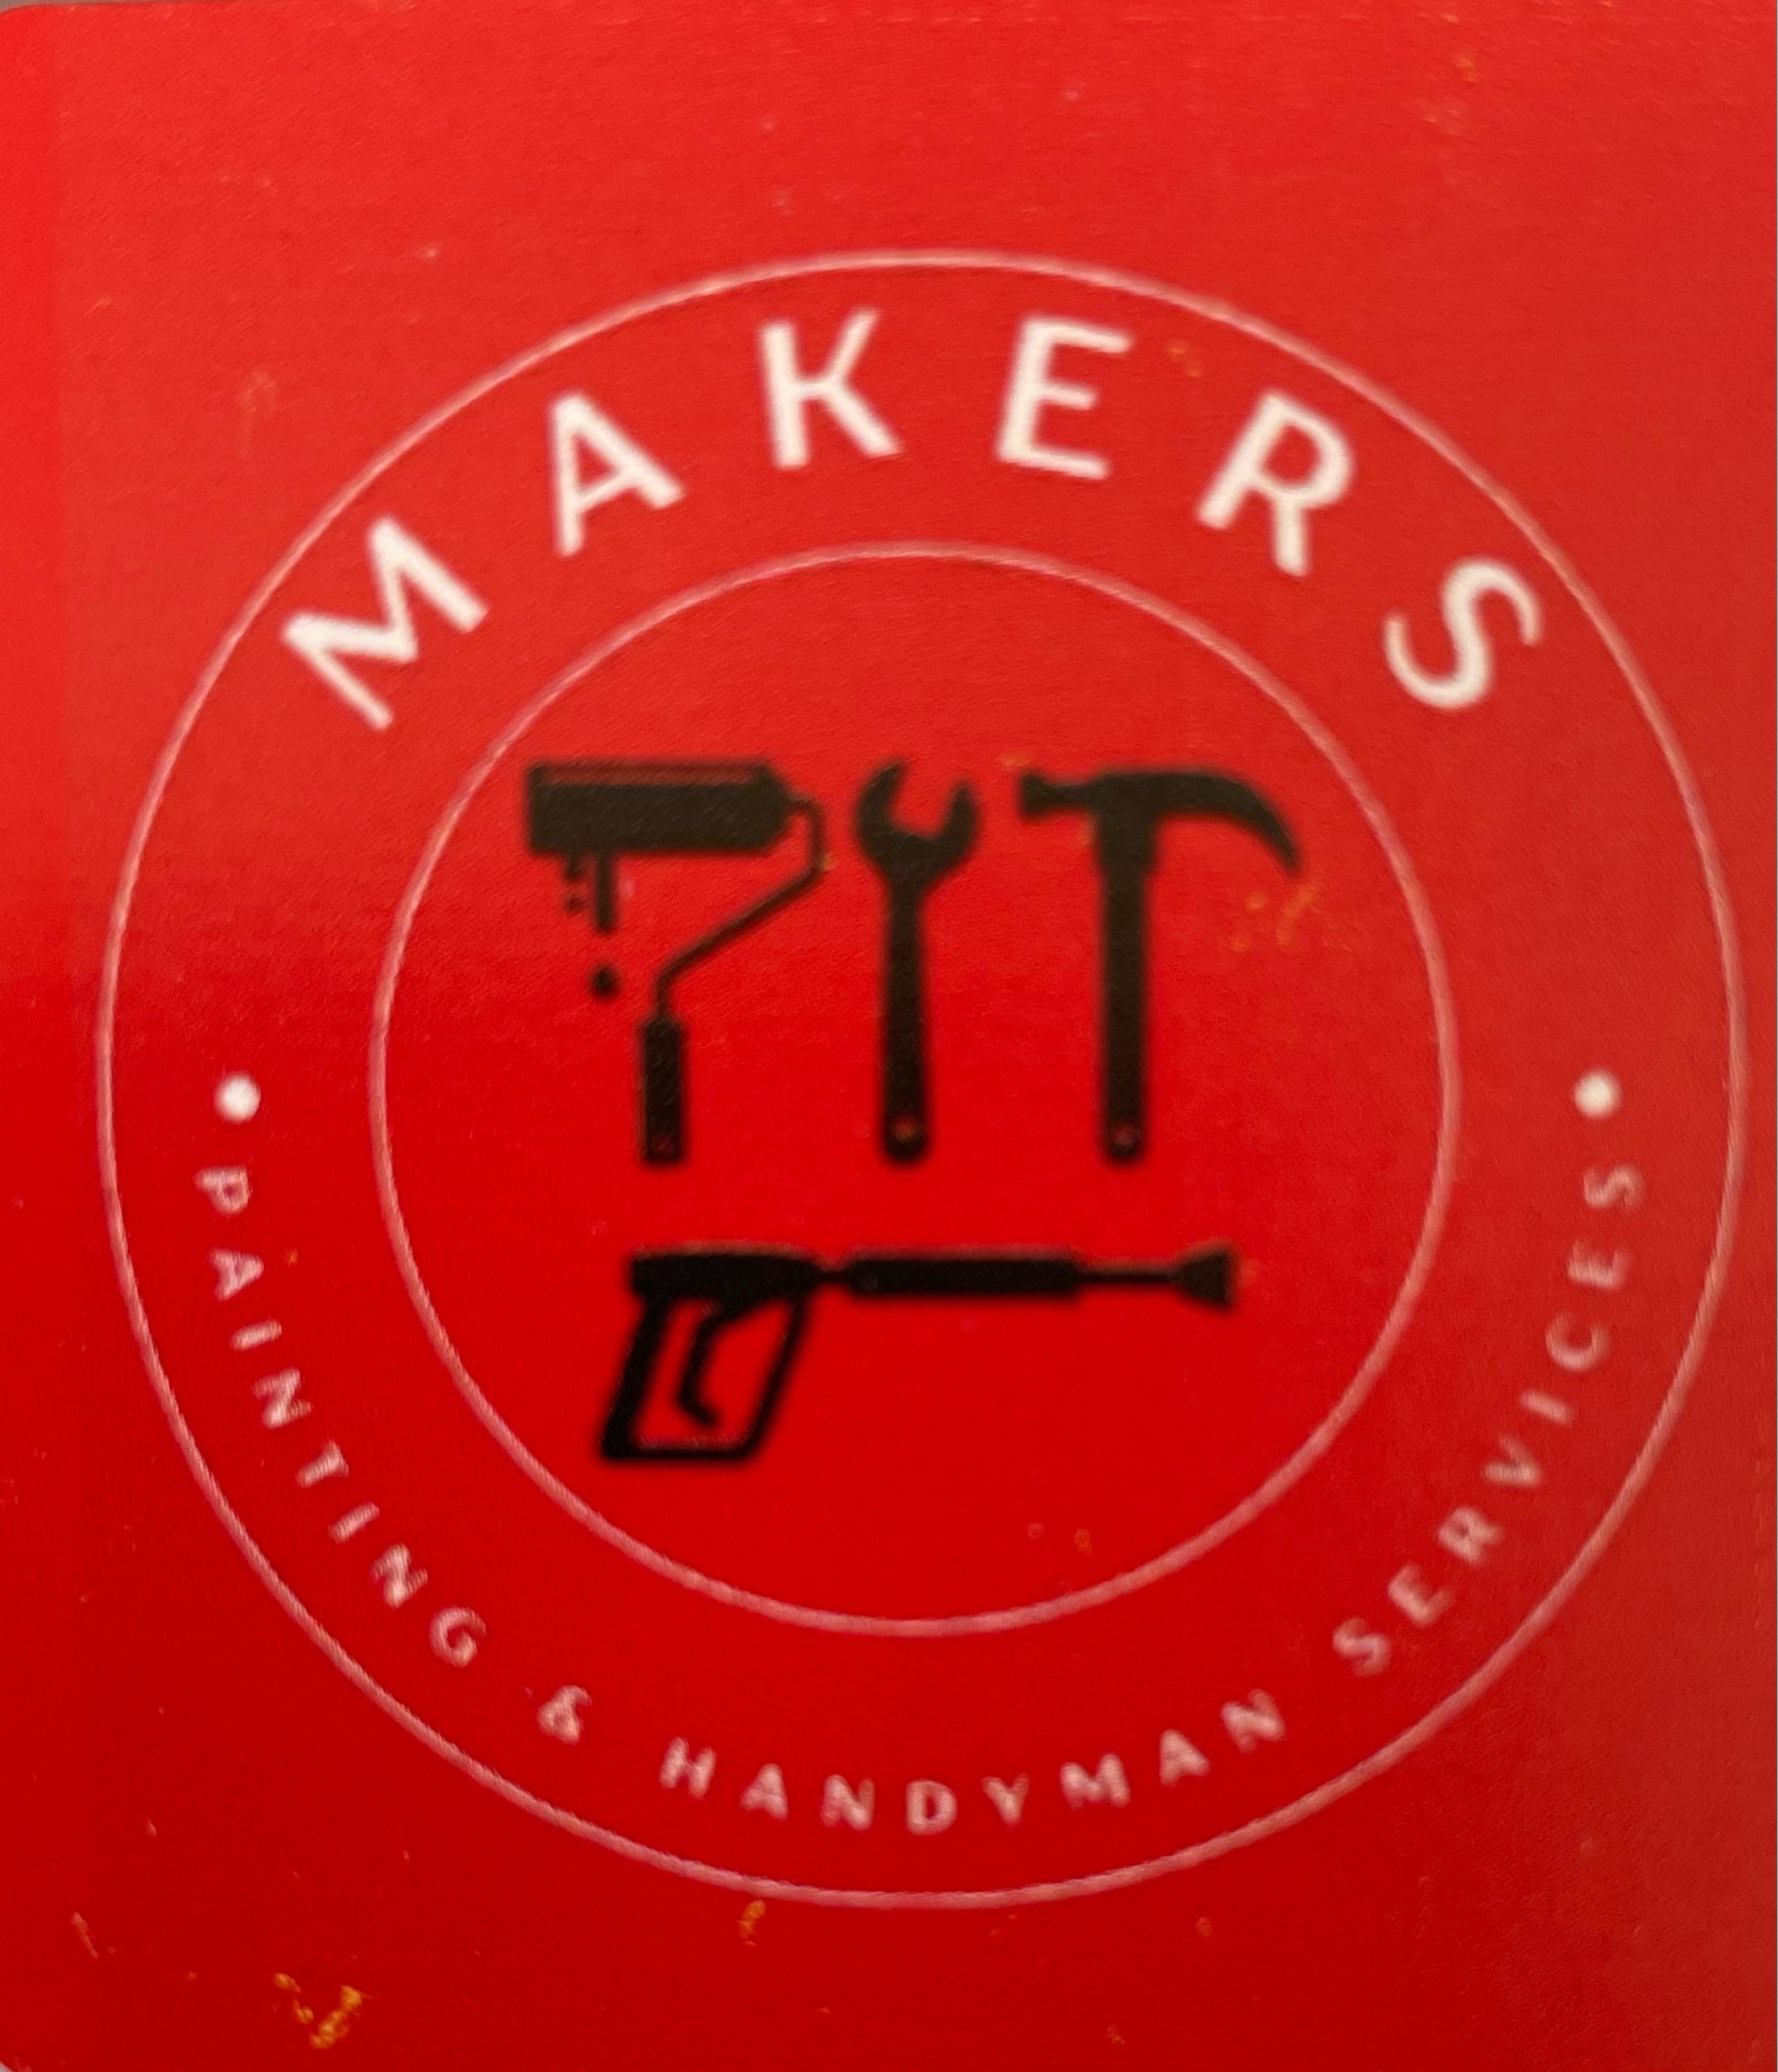 Makers Painting And Handyman Services Logo